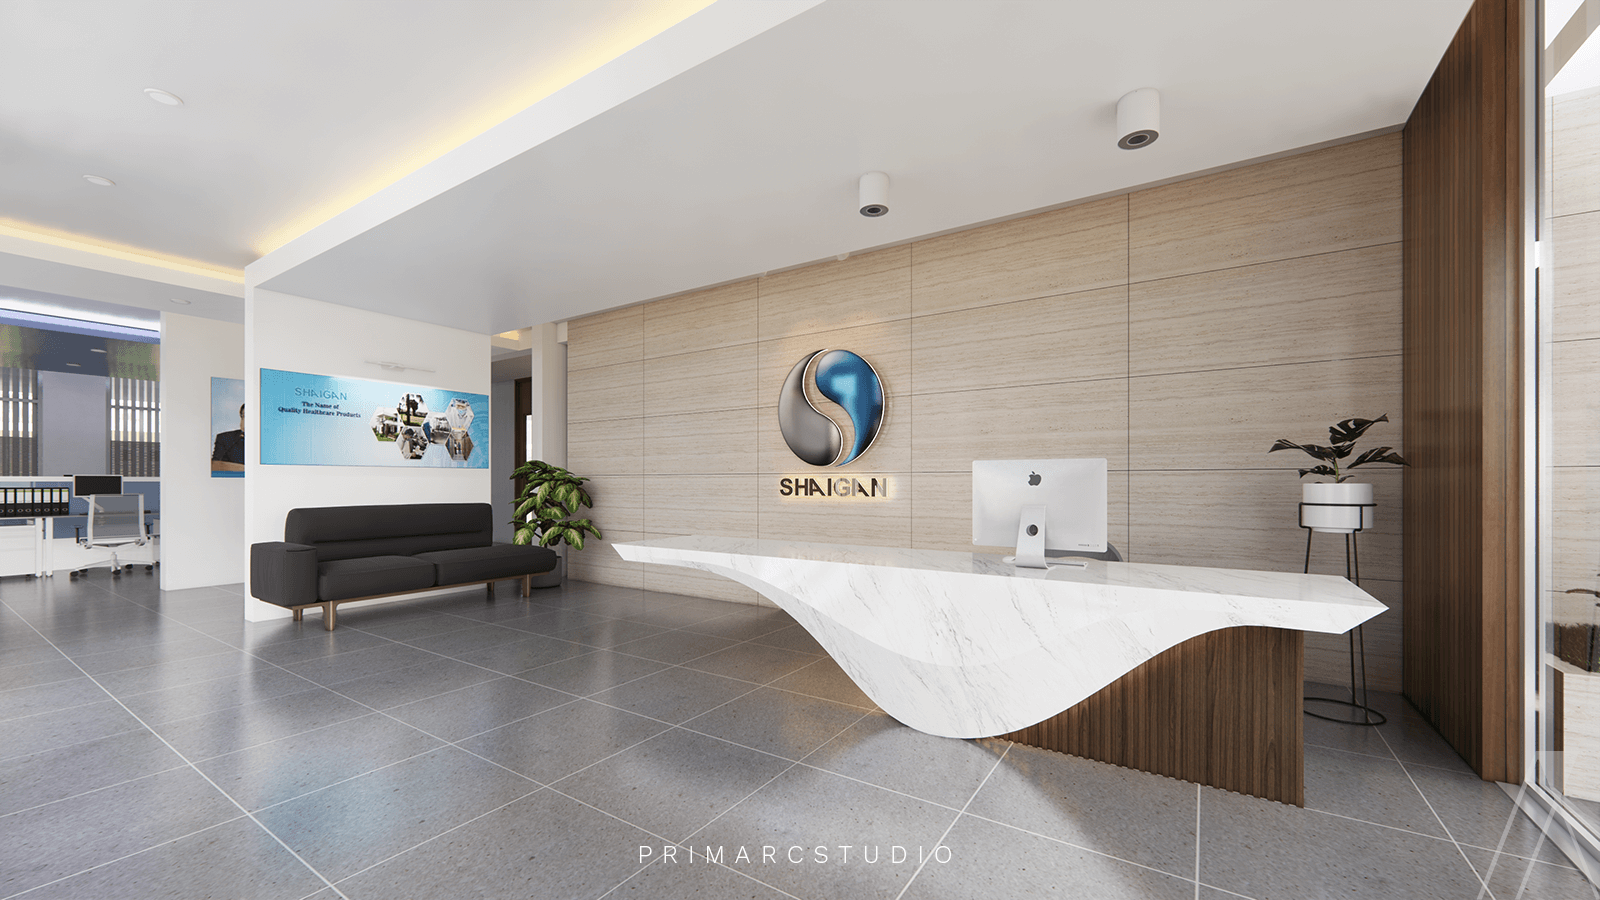 Office interior design for Pharmaceuticals Company